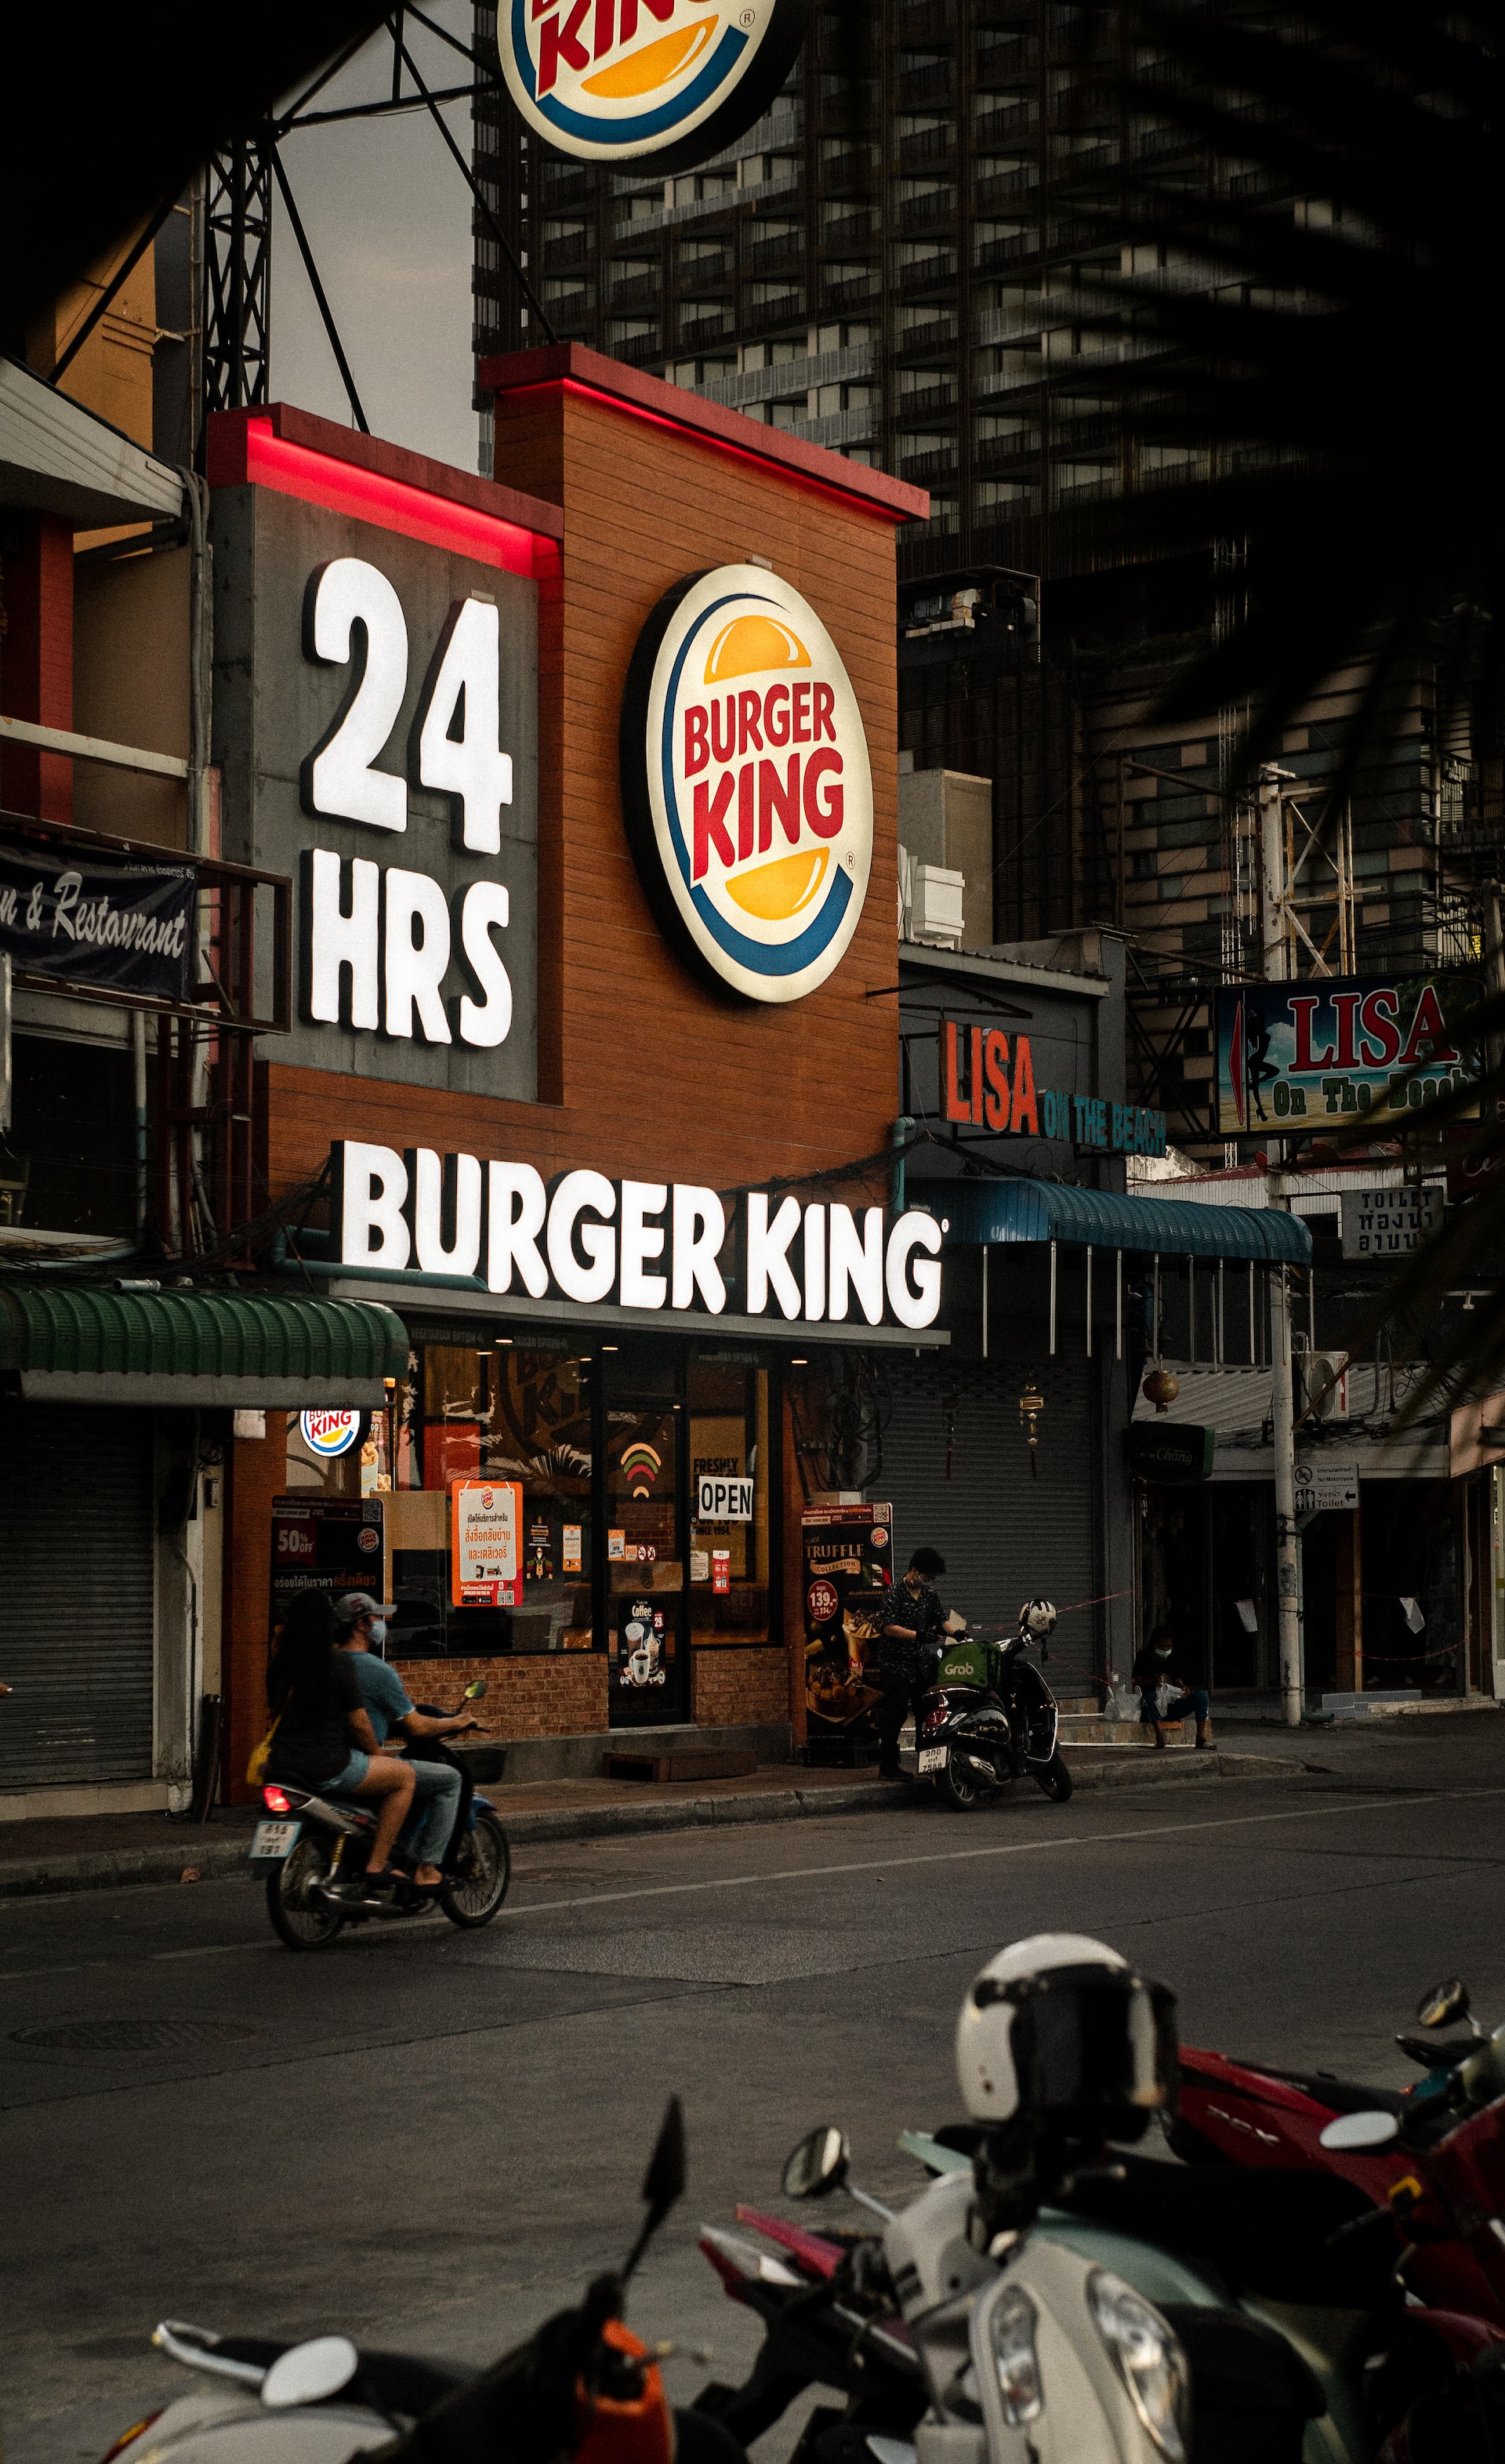 Burger King Mystery Shopper - When Burger King Asked For Help In The European Market